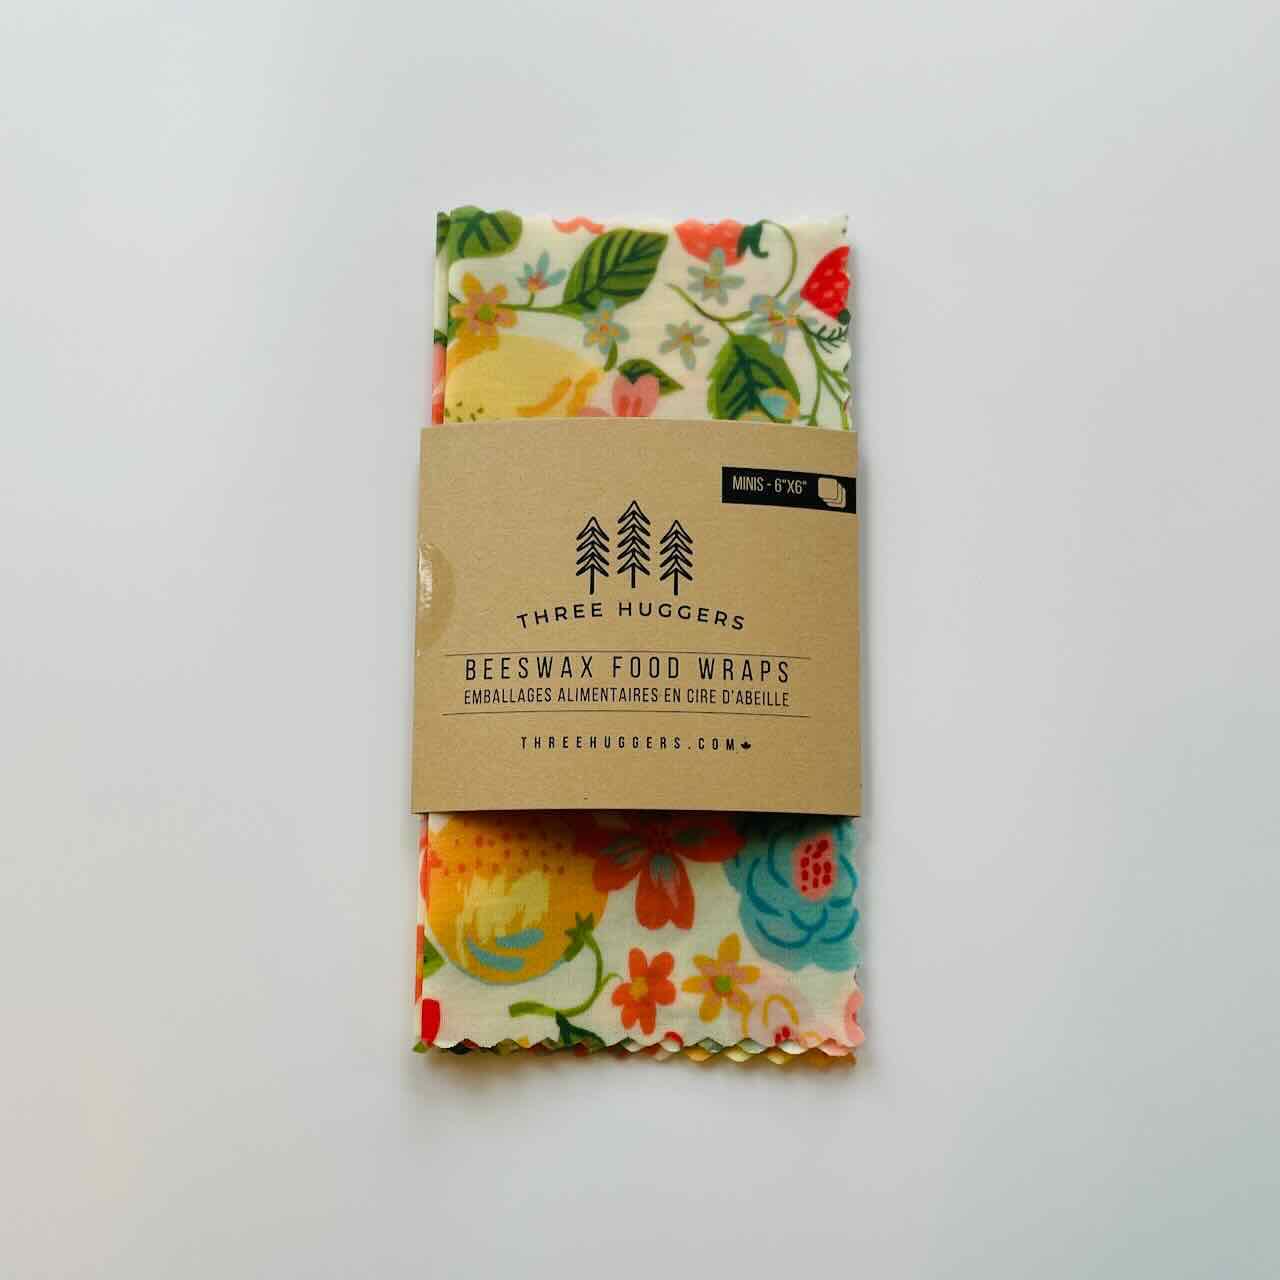 mini beeswax wraps set of 3 orchard pattern packaging